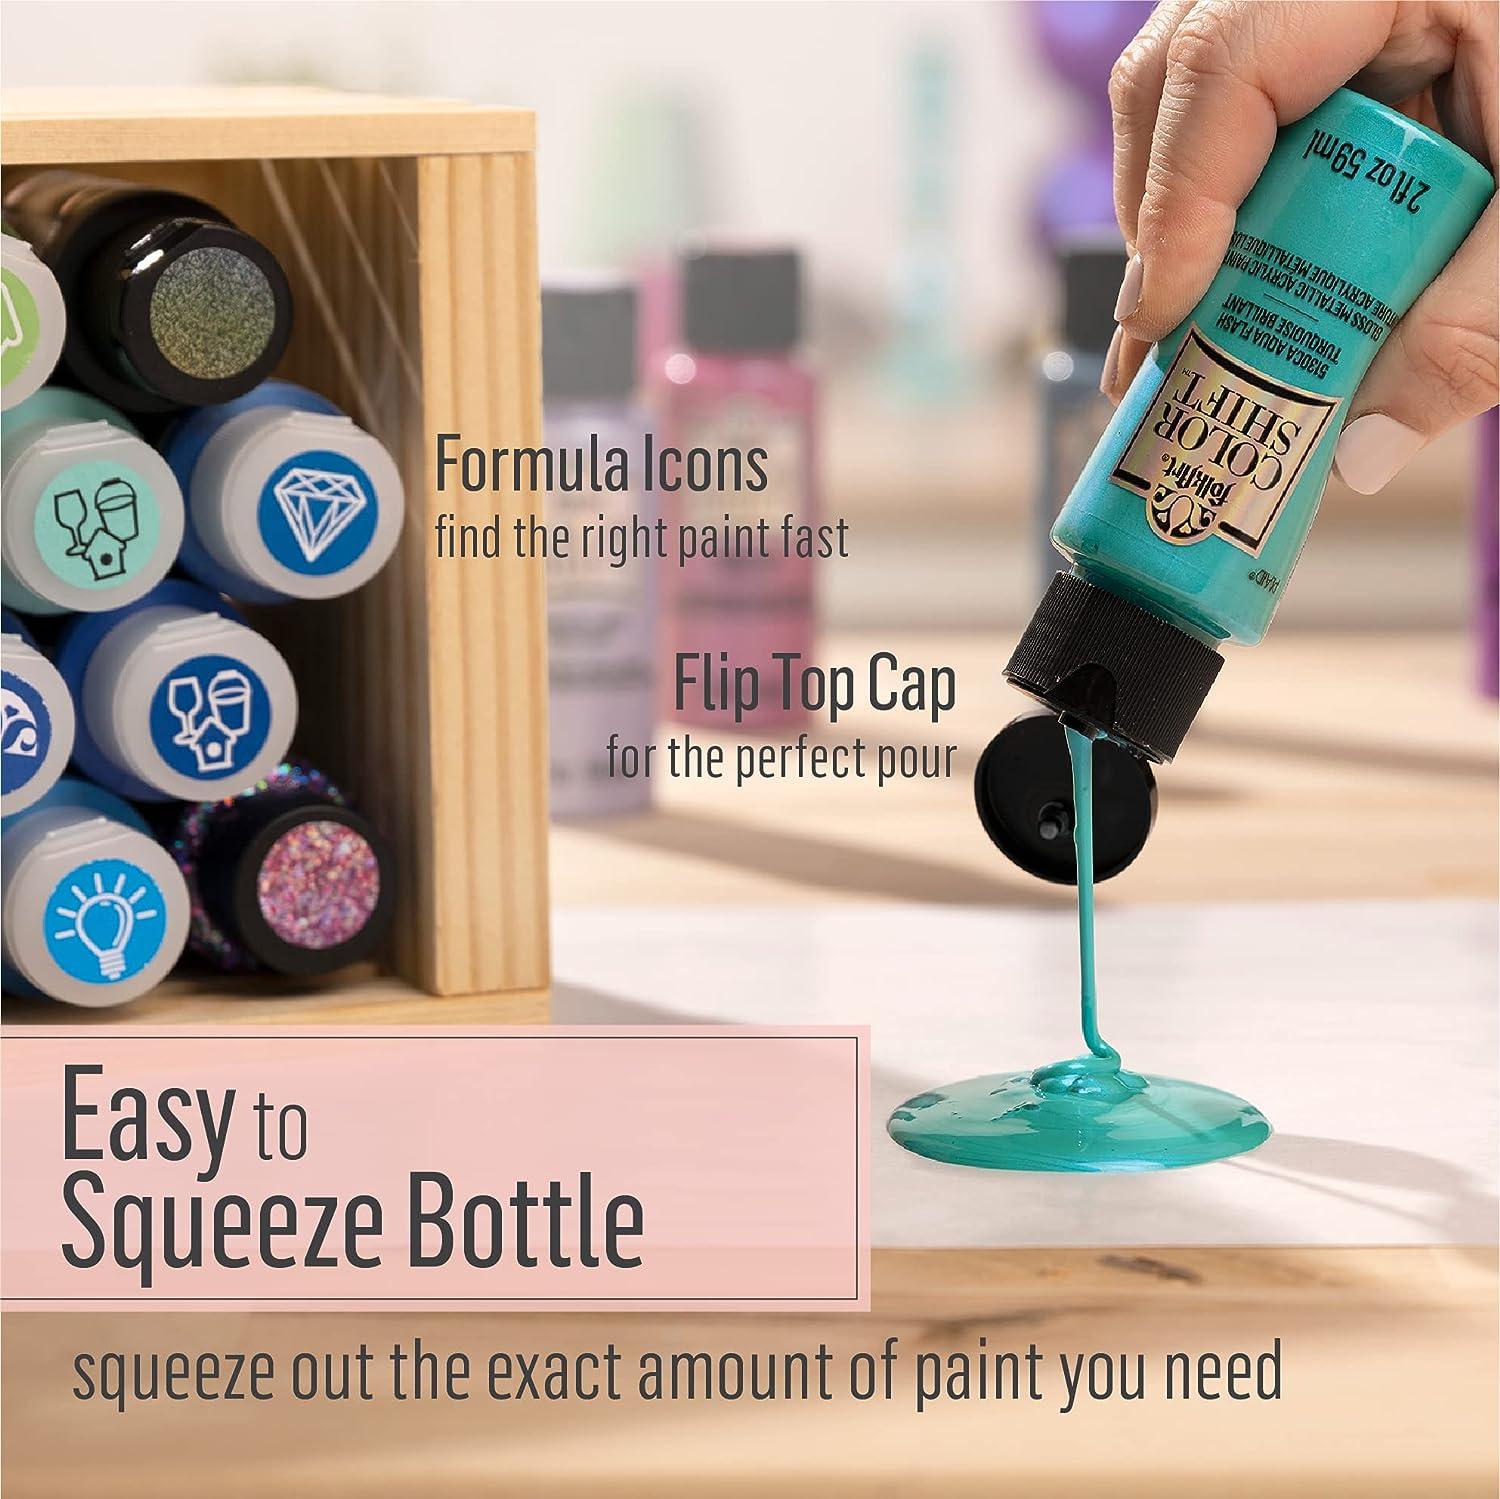 Multi-Surface Glitter Acrylic Paint in Turquoise by FolkArt